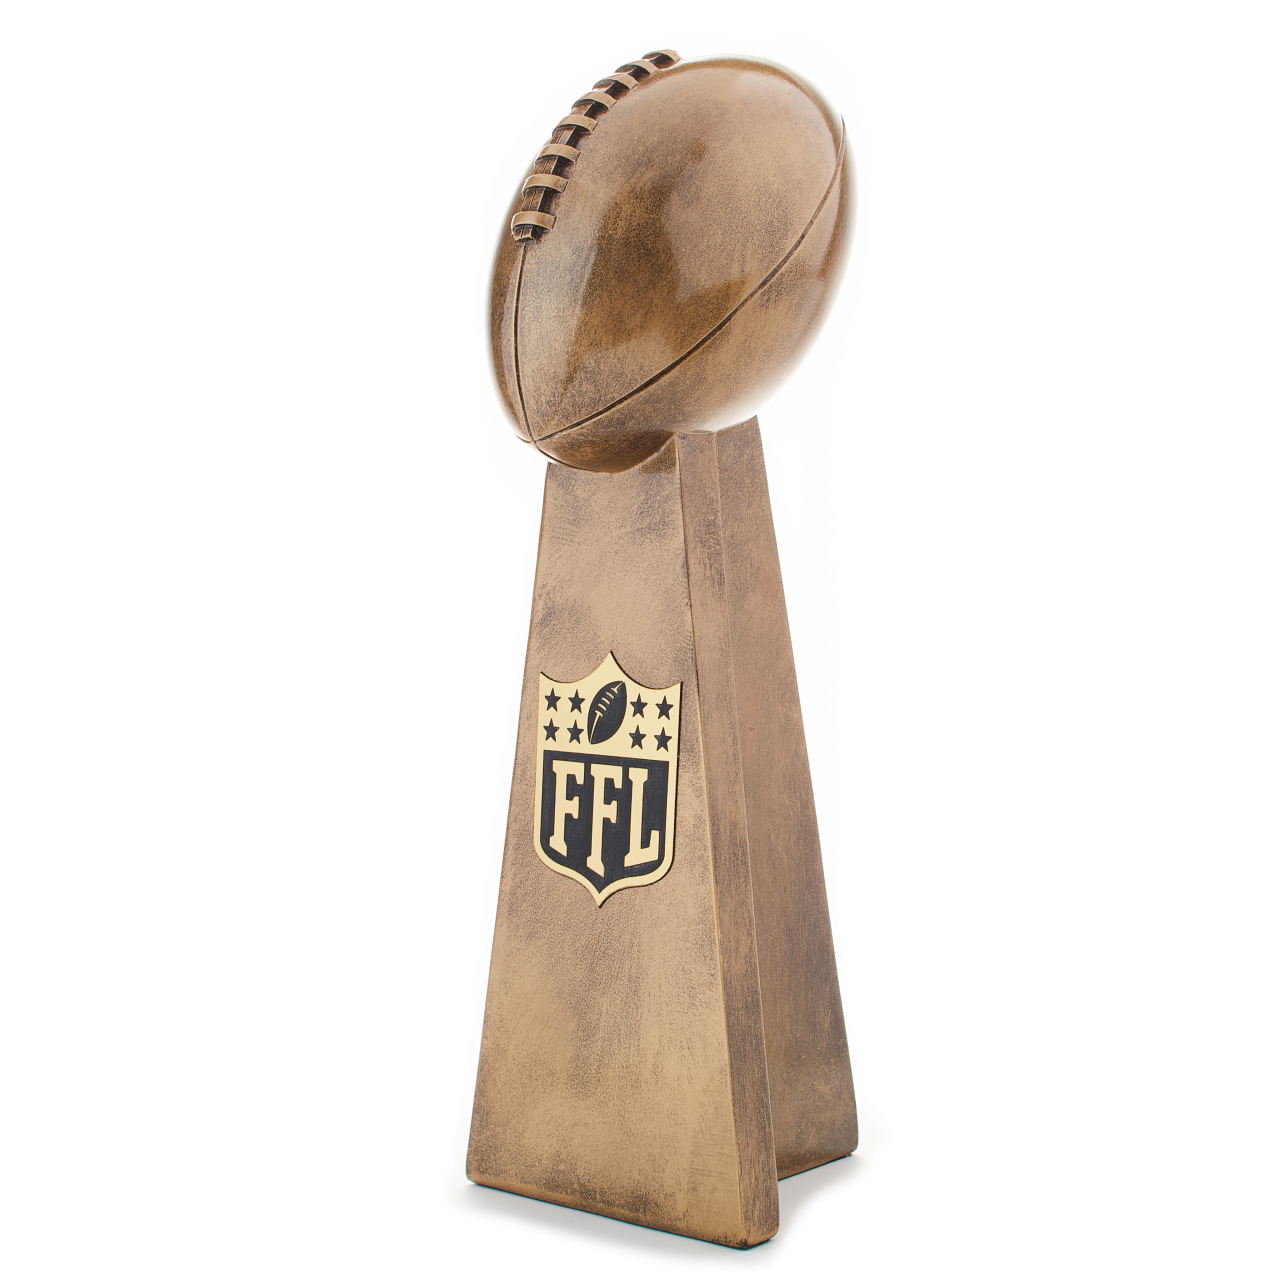 Fantasy Football Trophy with Realistic Design | Gold Championship Replica | First Place Award for League or Team Champions | Available in 2 Sizes